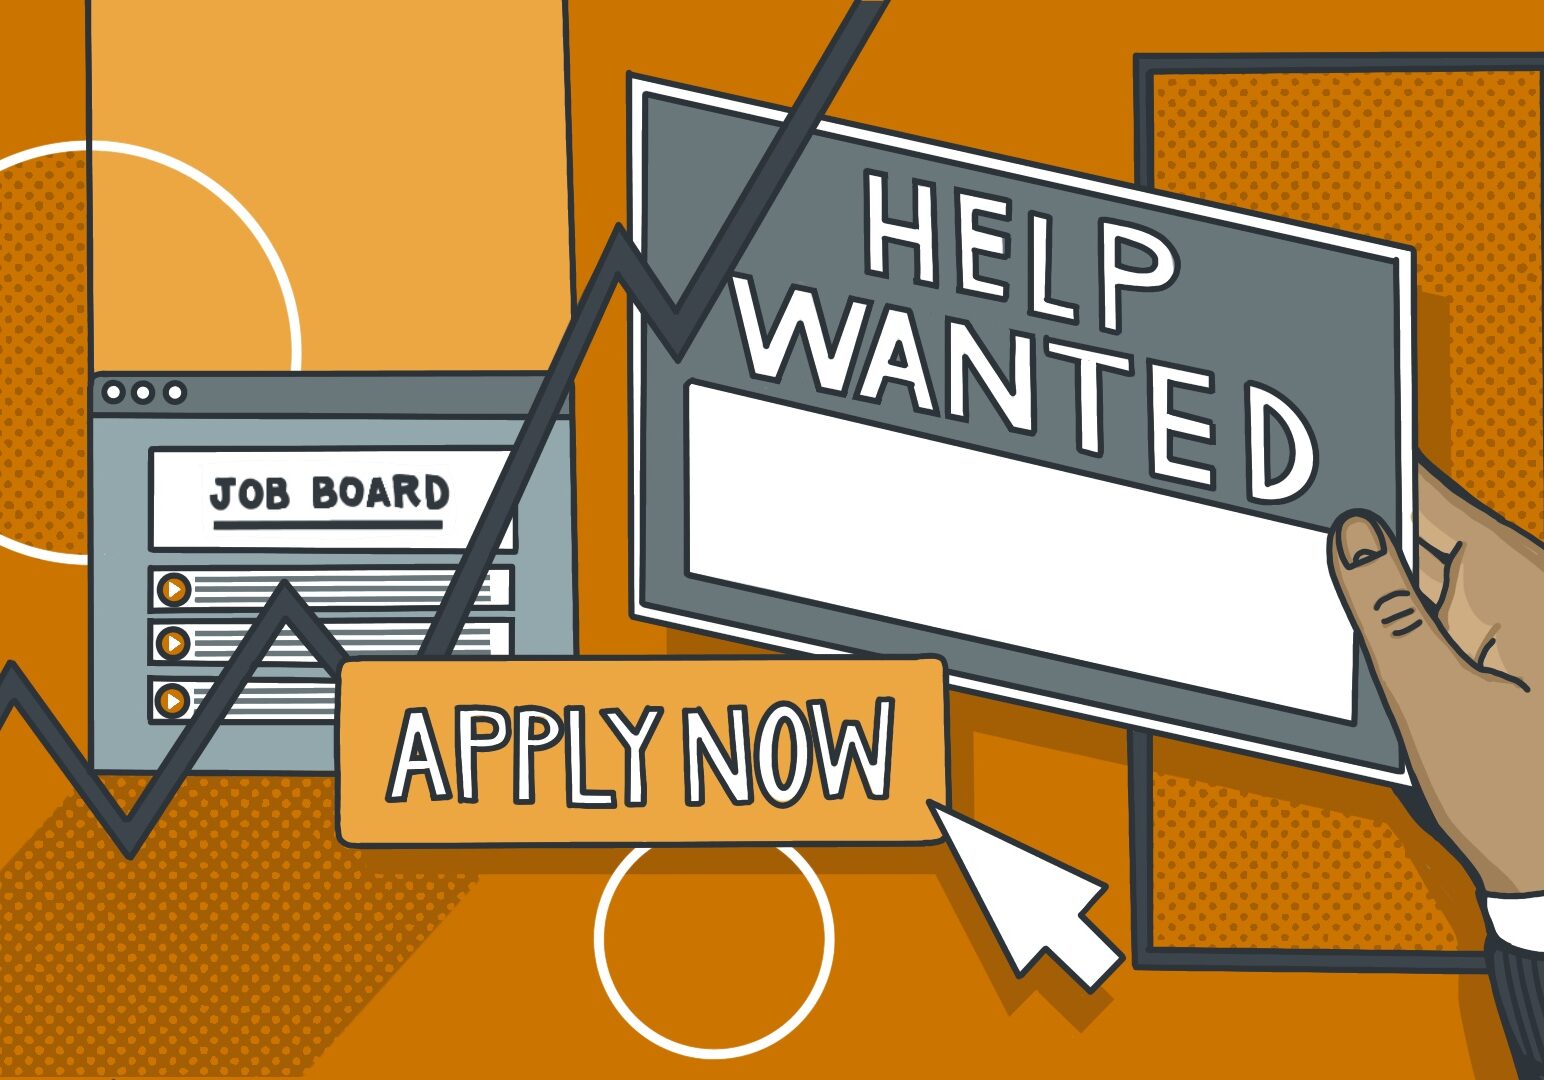 Collage-style illustration shows a series of help wanted signs and job applications.